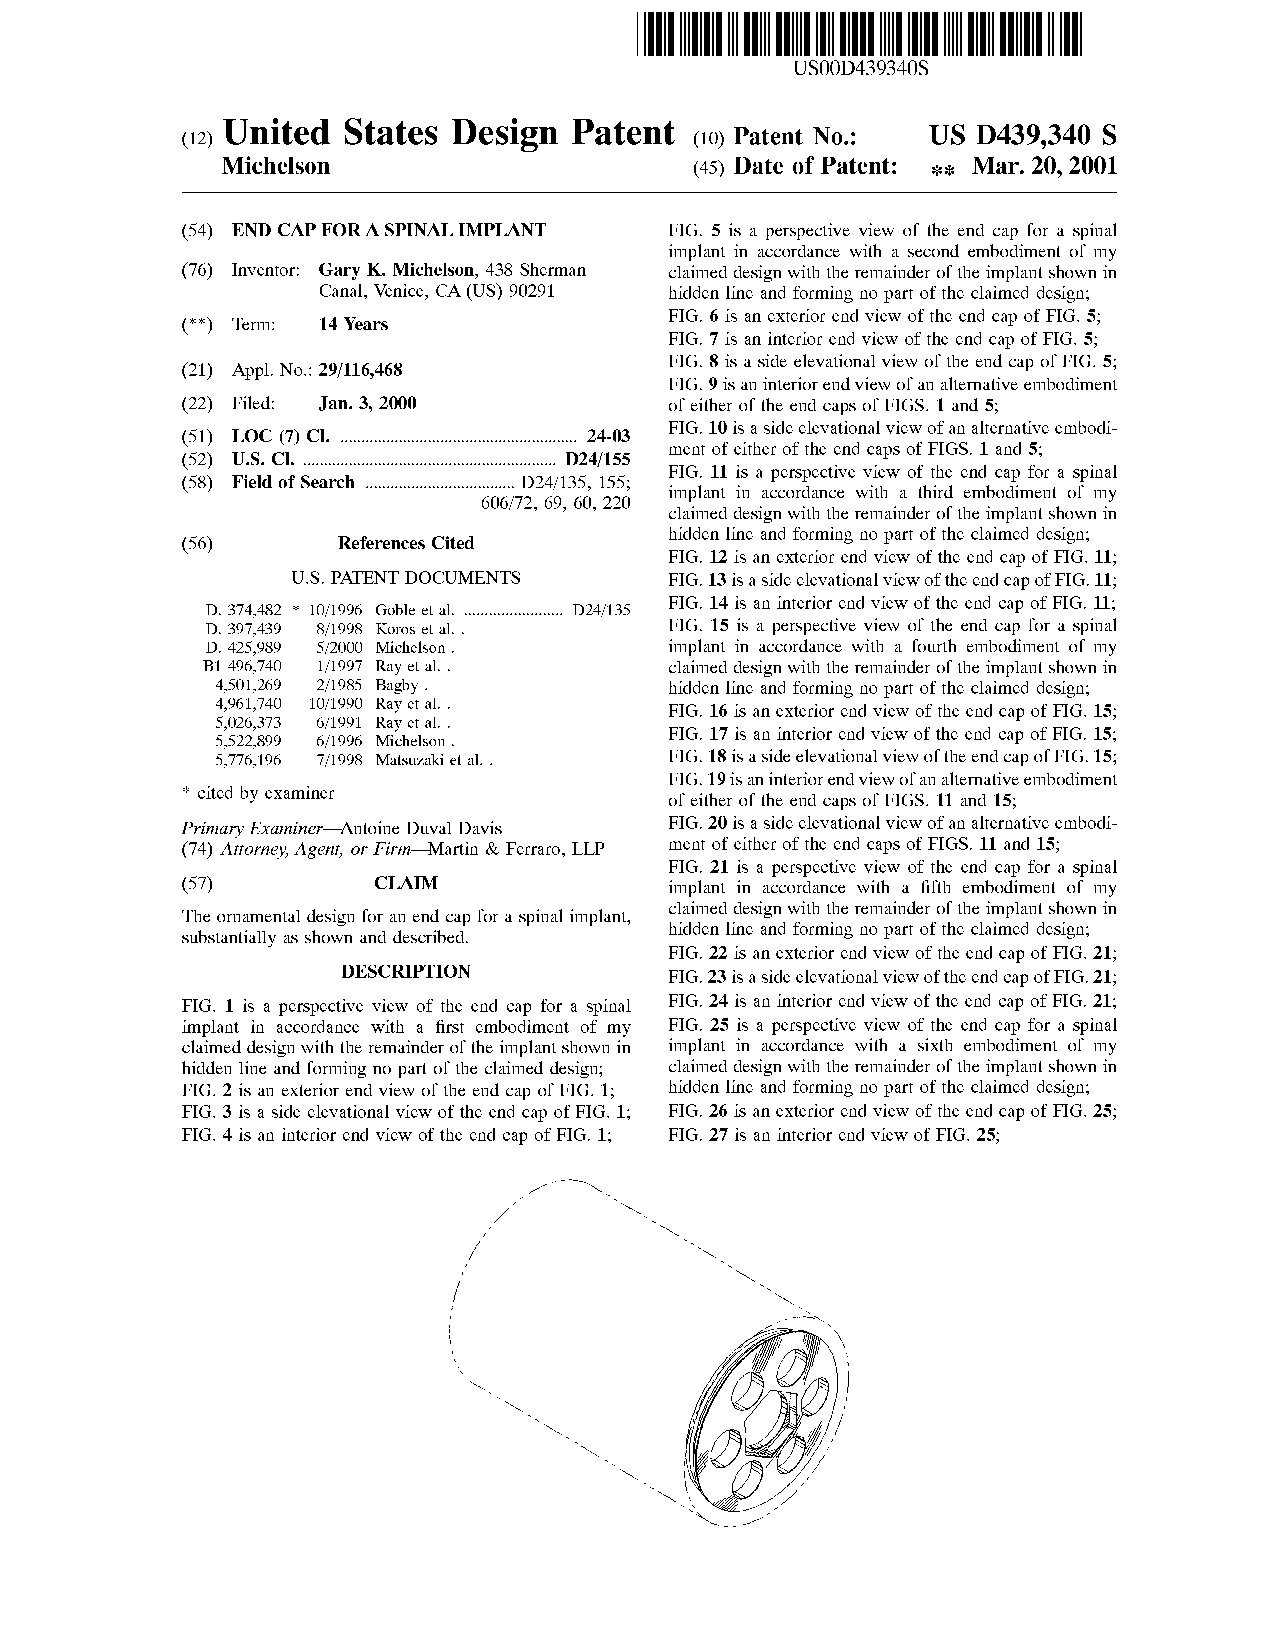 End cap for a spinal implant - Patent D439,340